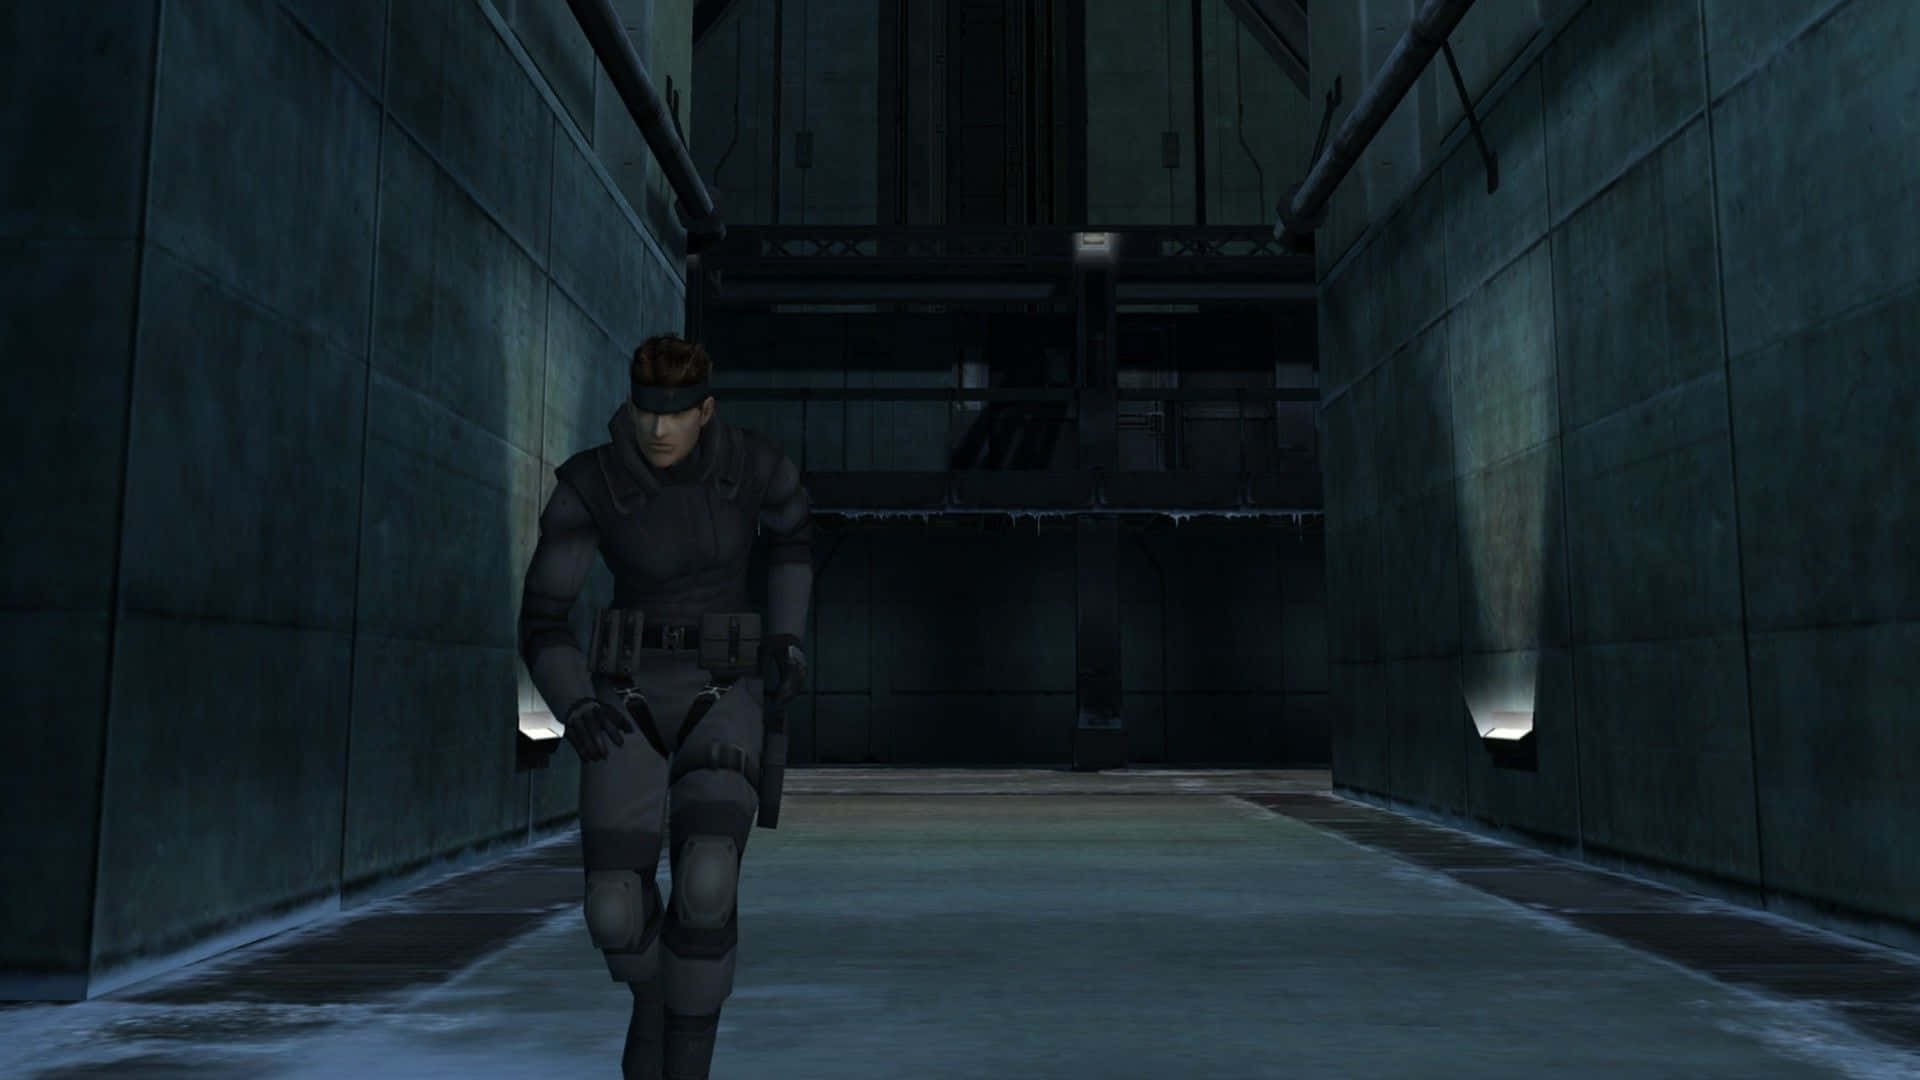 Solid Snake, in his mission to save the world. Wallpaper